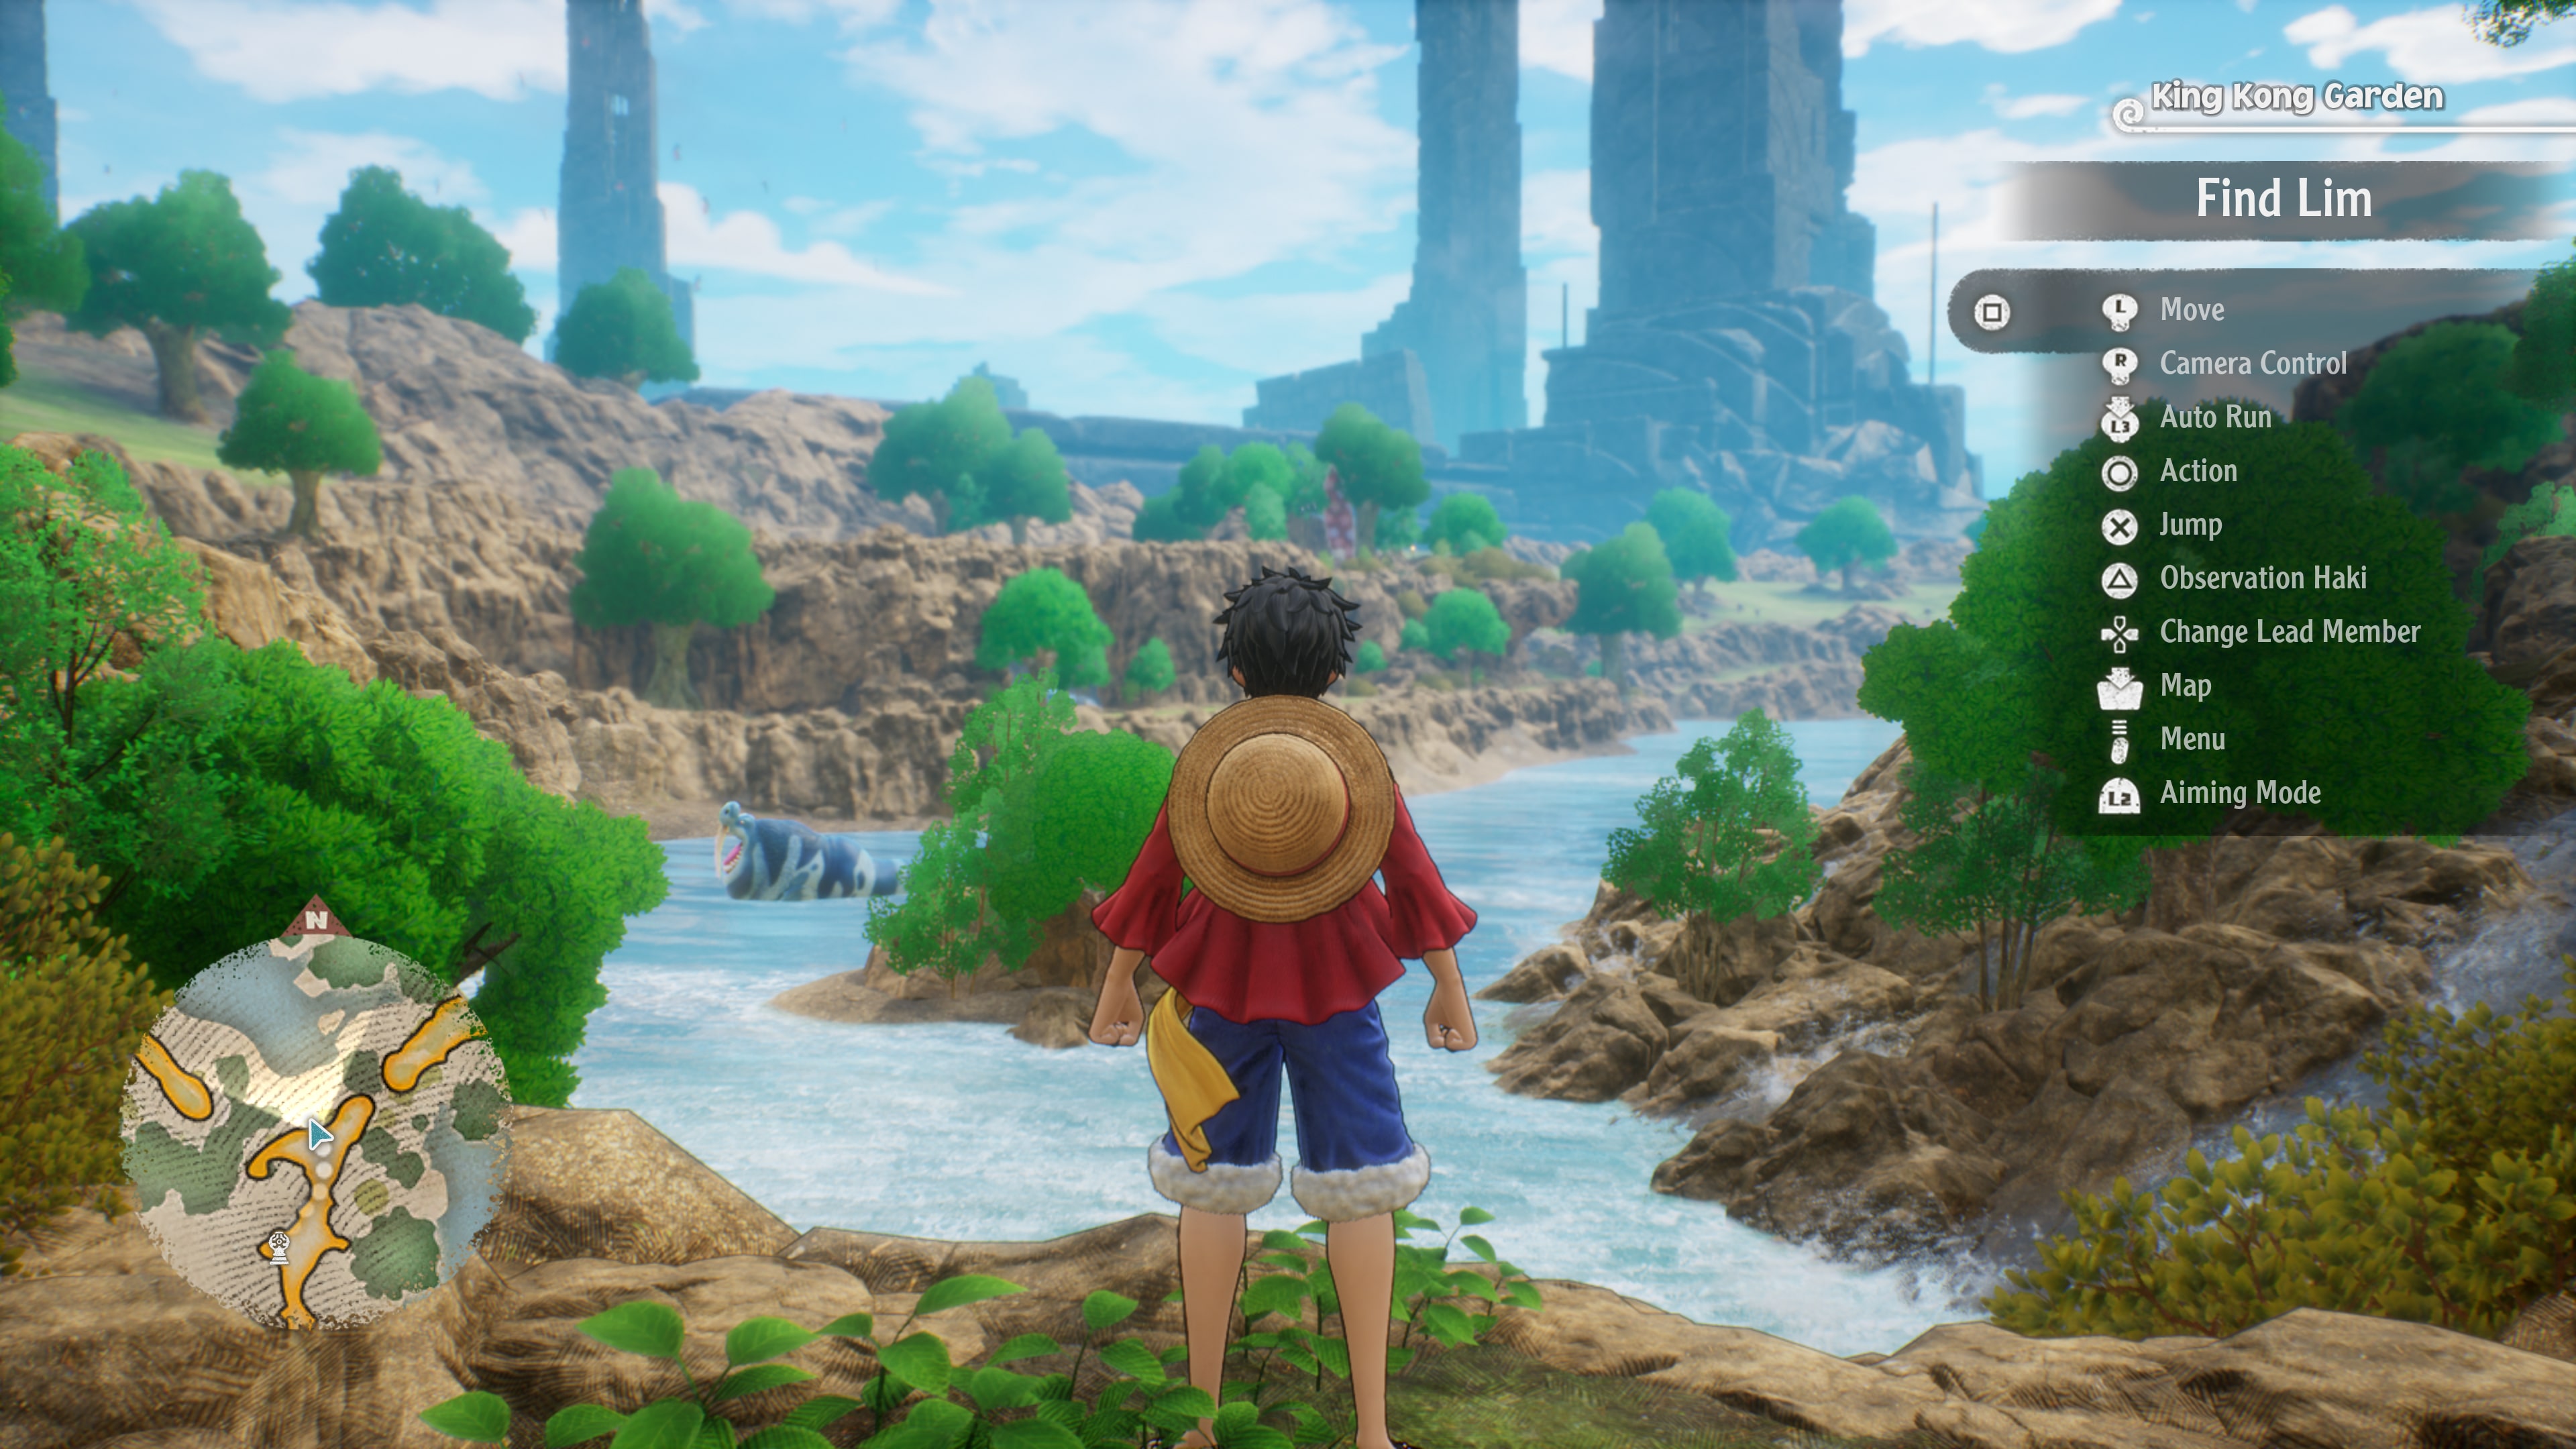 One Piece Odyssey Free Demo Gives Players a 2-Hour Taste of the